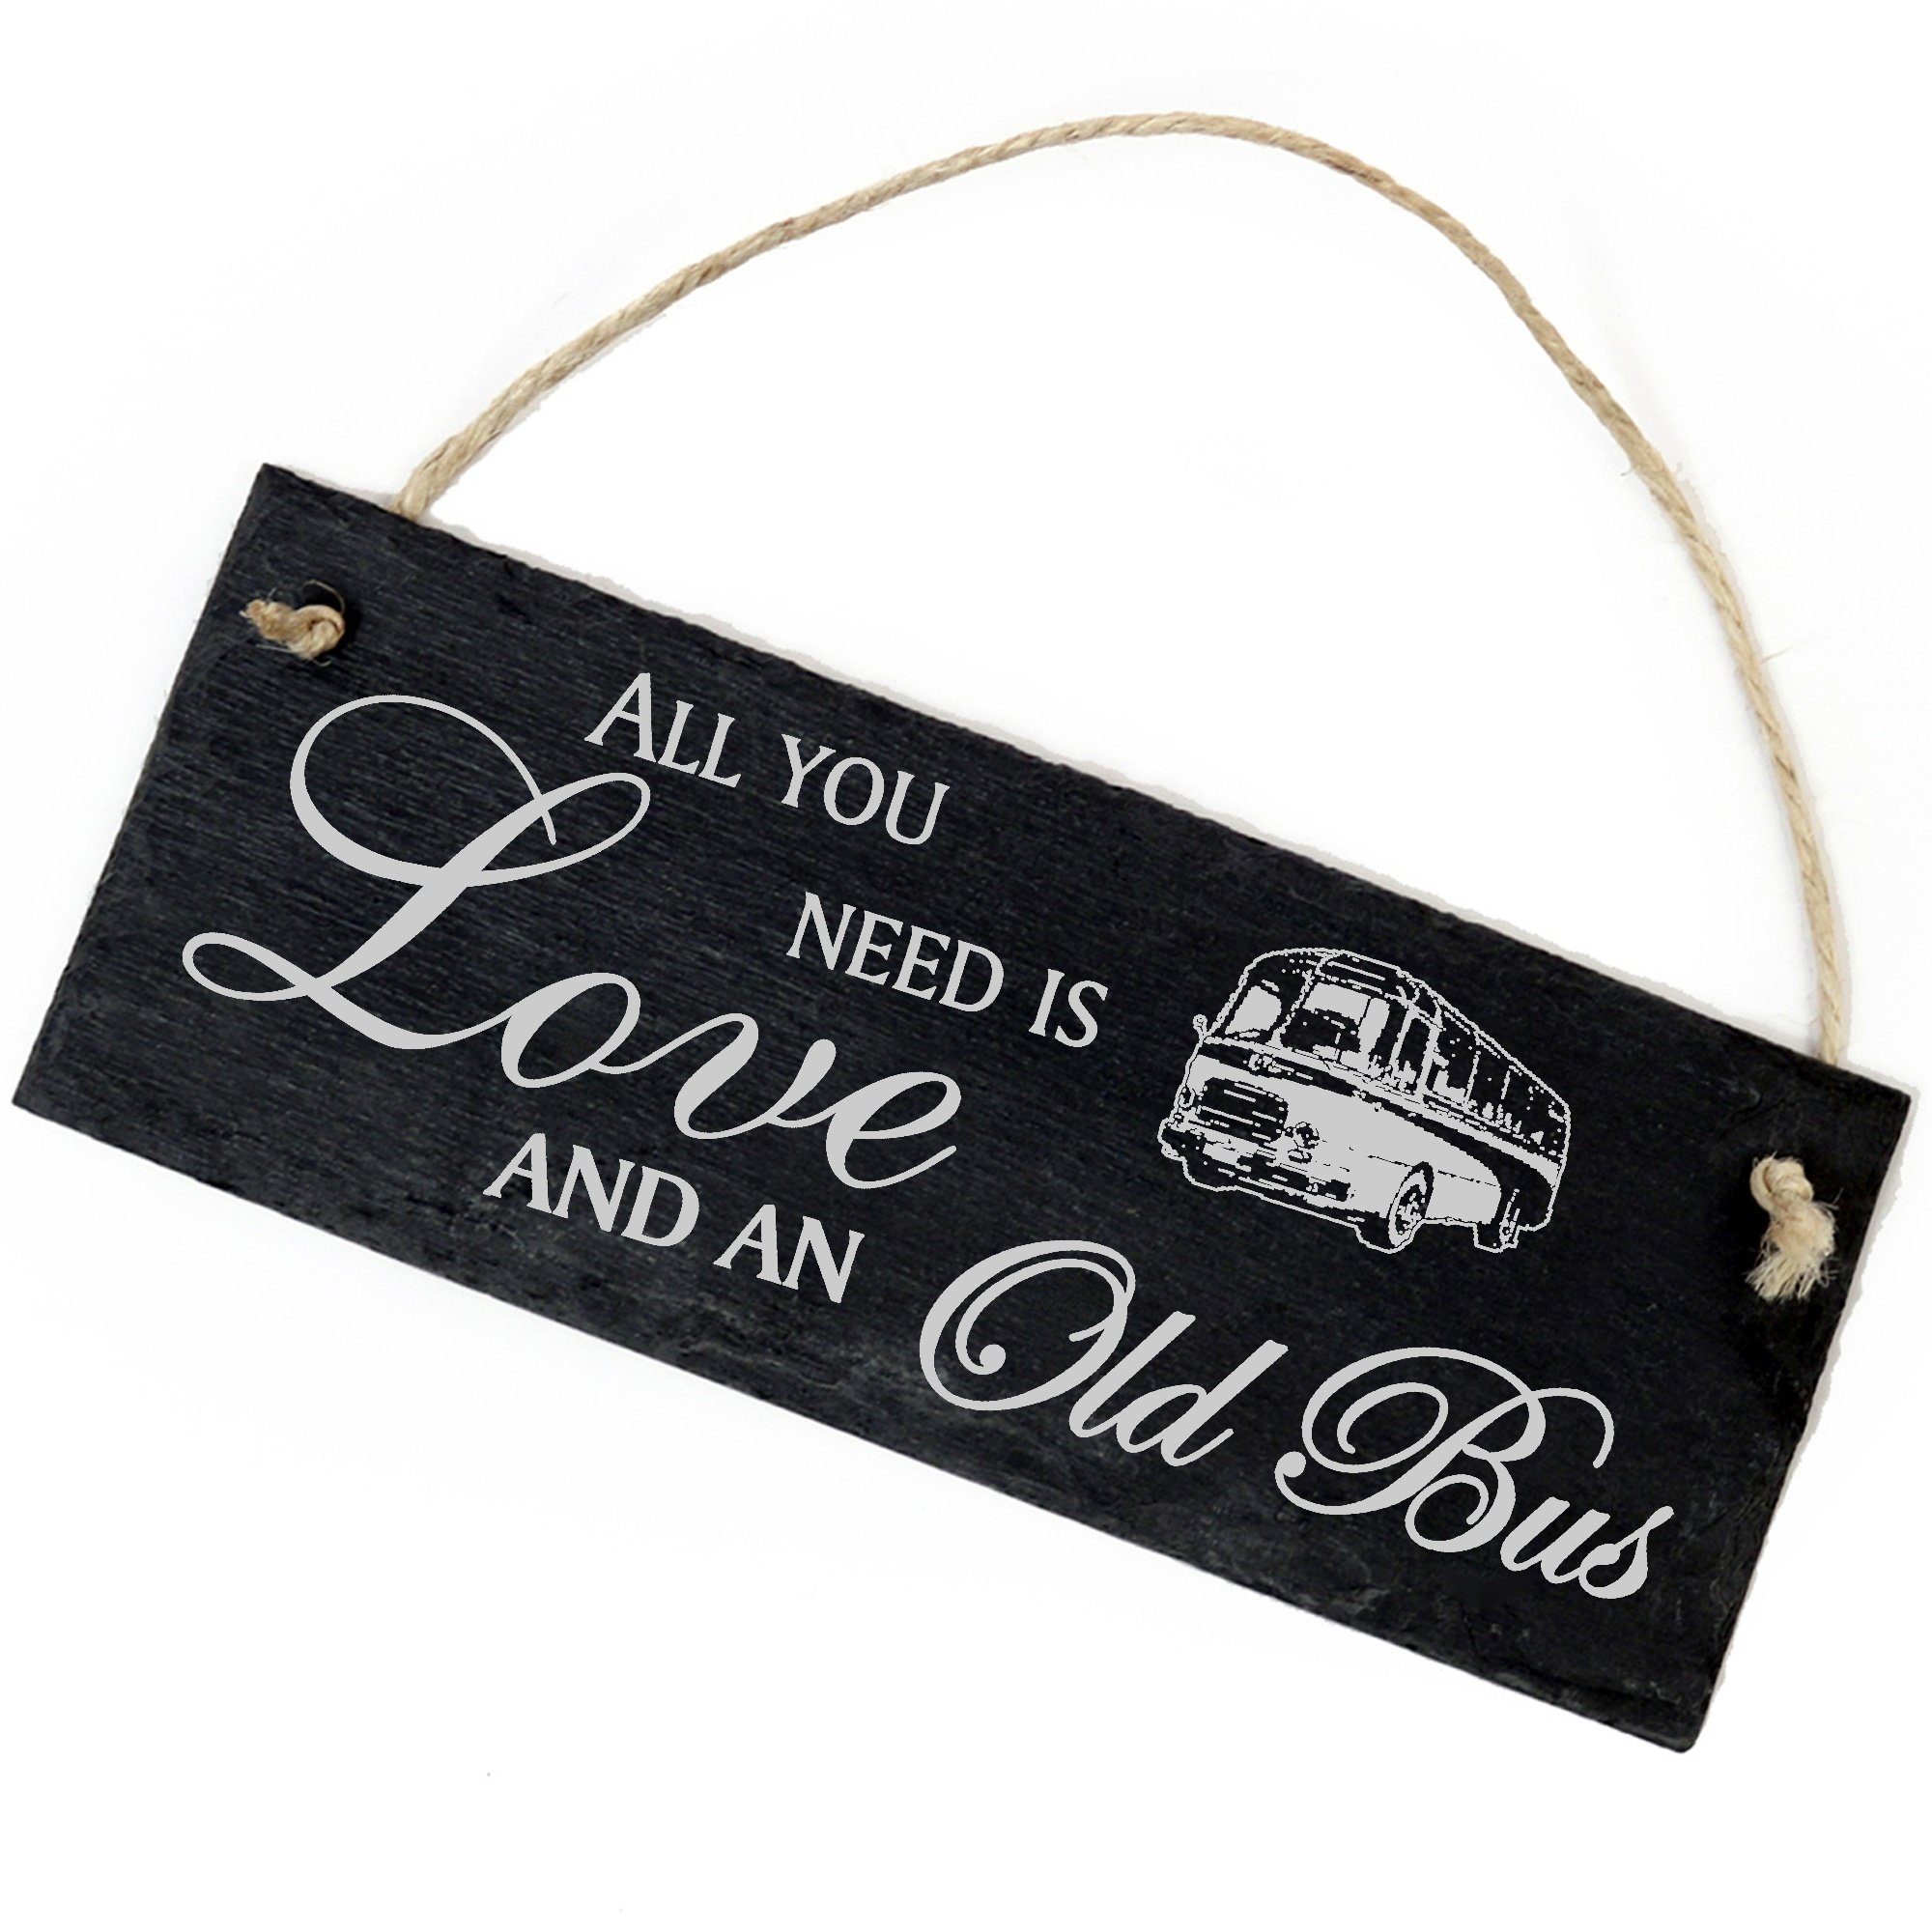 Dekolando Hängedekoration alter Bus need and Love you is Old Bus an 22x8cm All